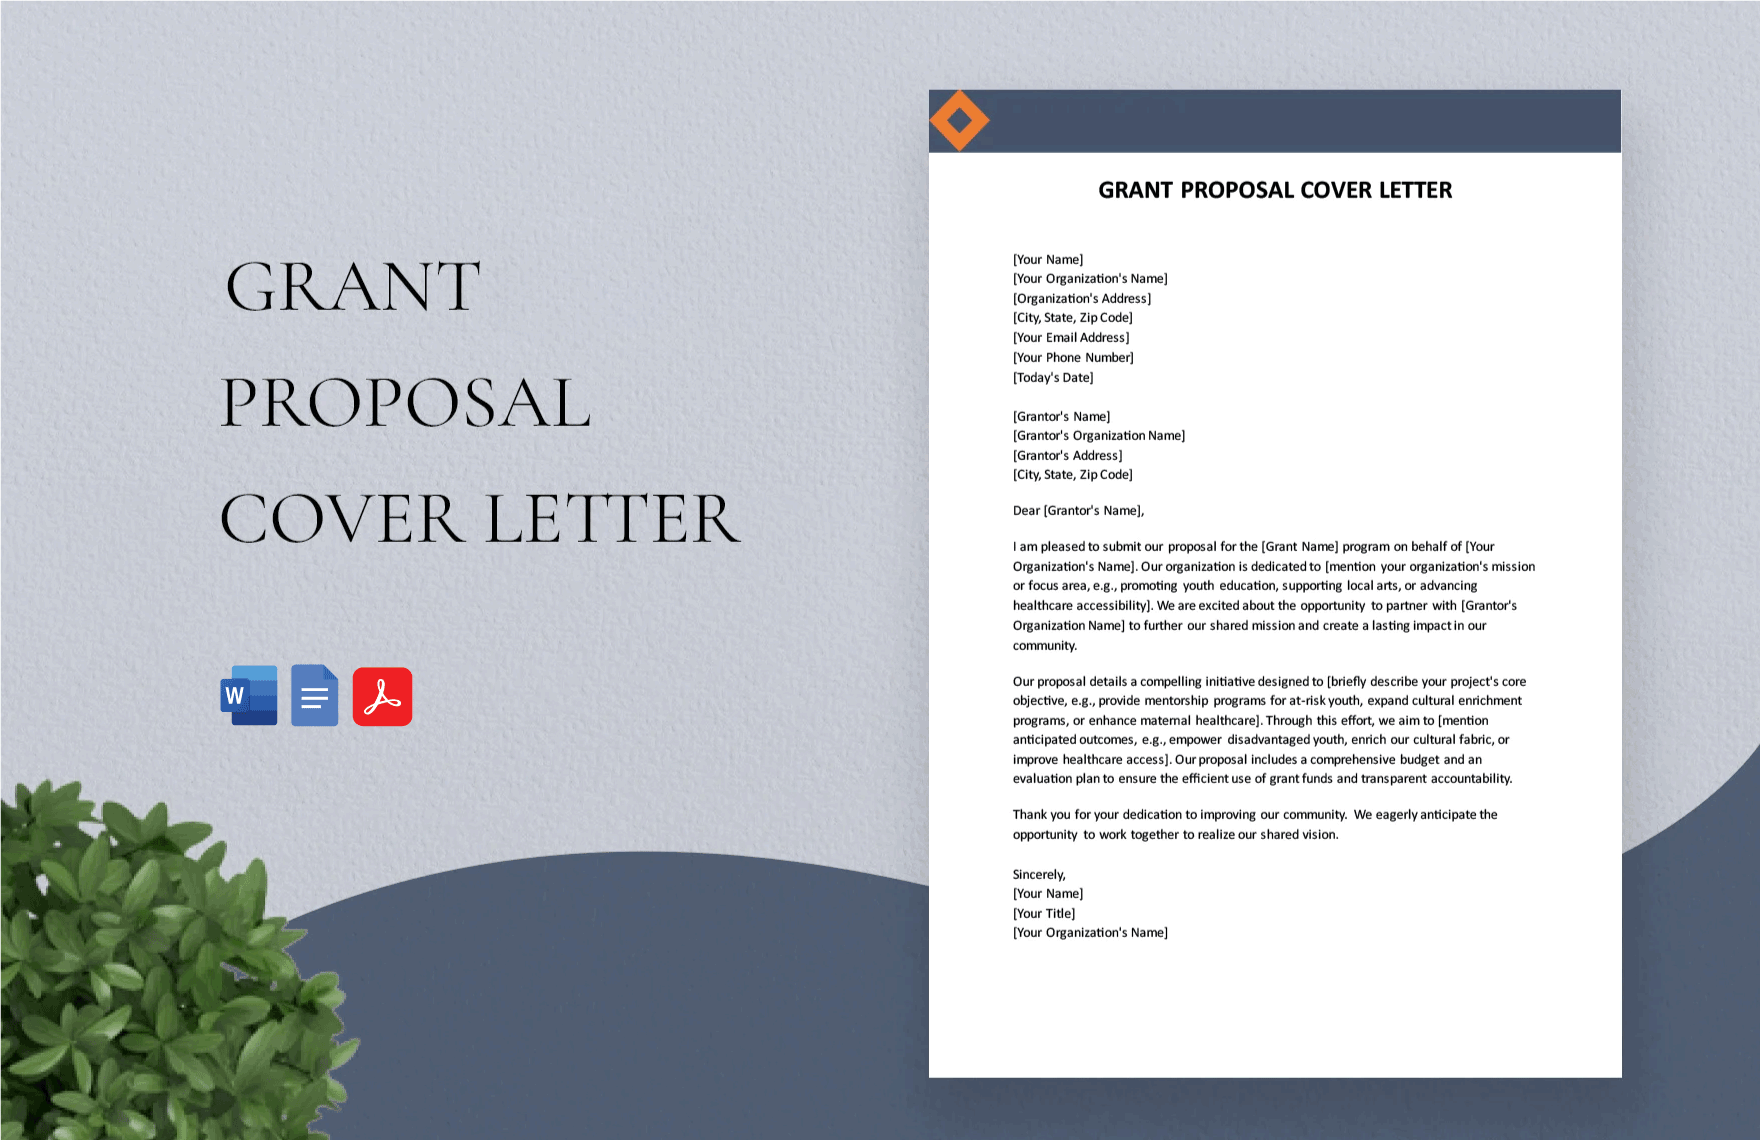 Grant Proposal Cover Letter in Word, Google Docs, PDF